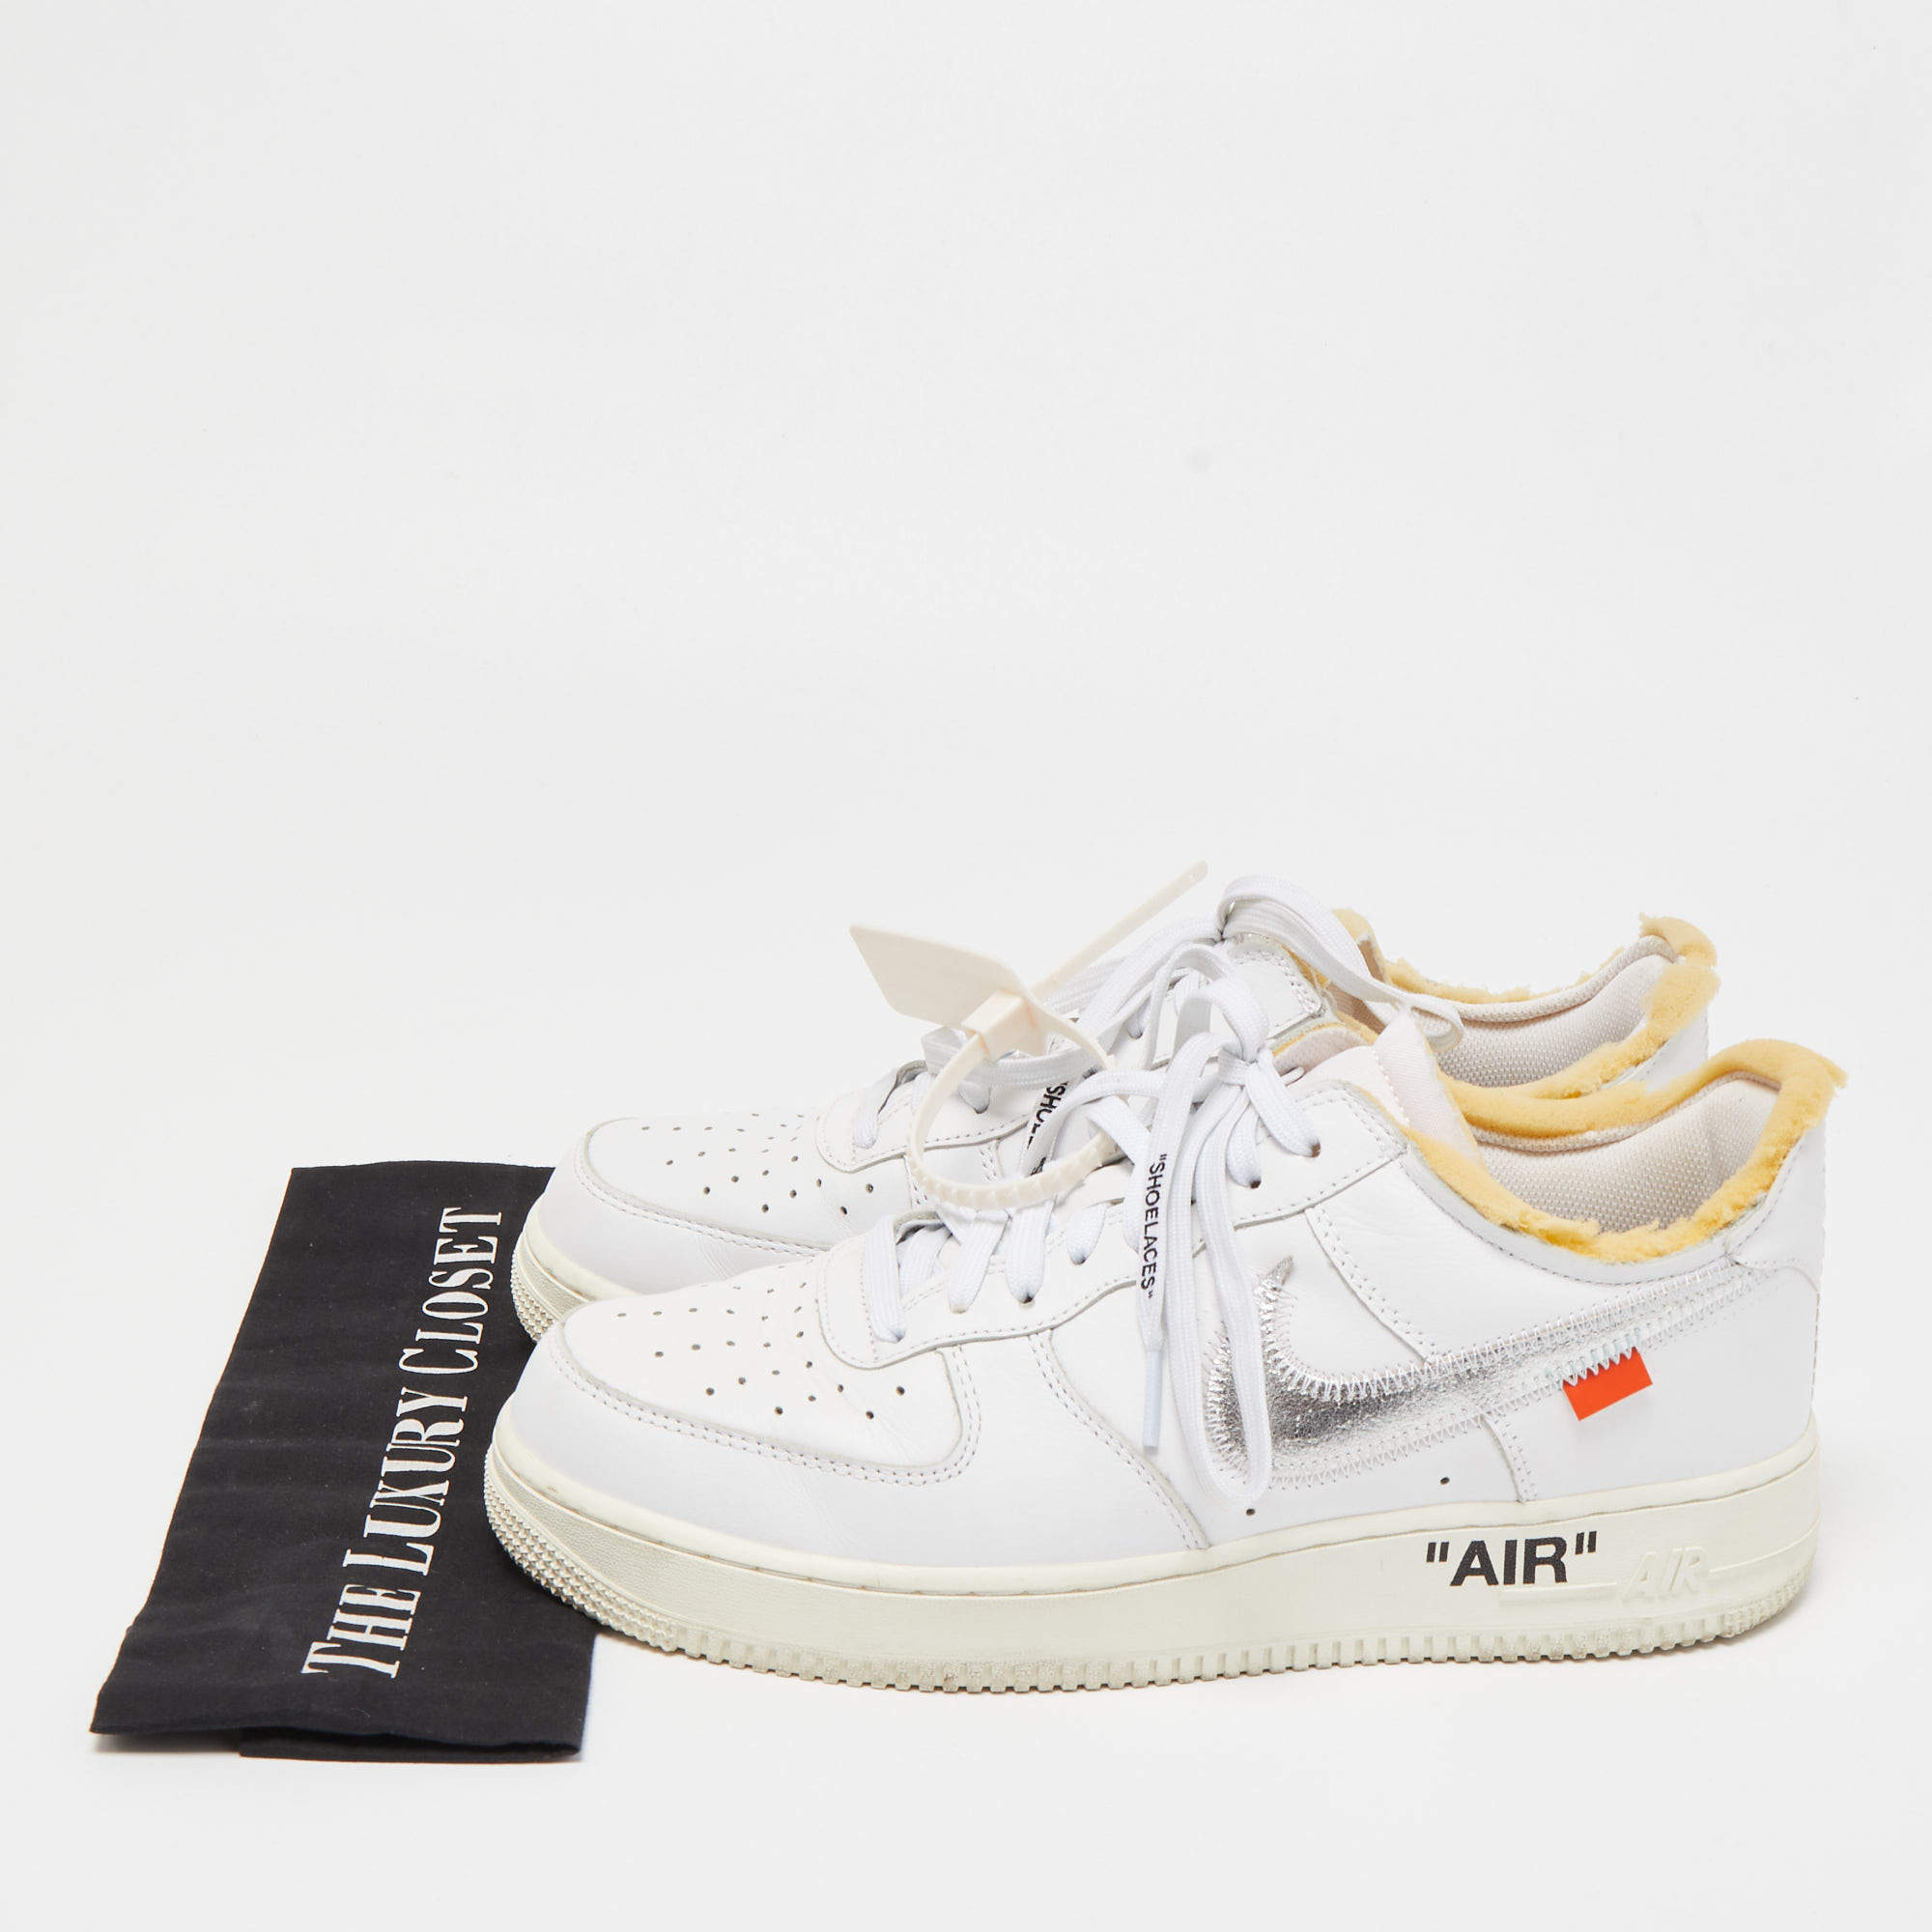 Nike White Leather Nike Air Force 1 ComplexCon Sneakers Size 42.5